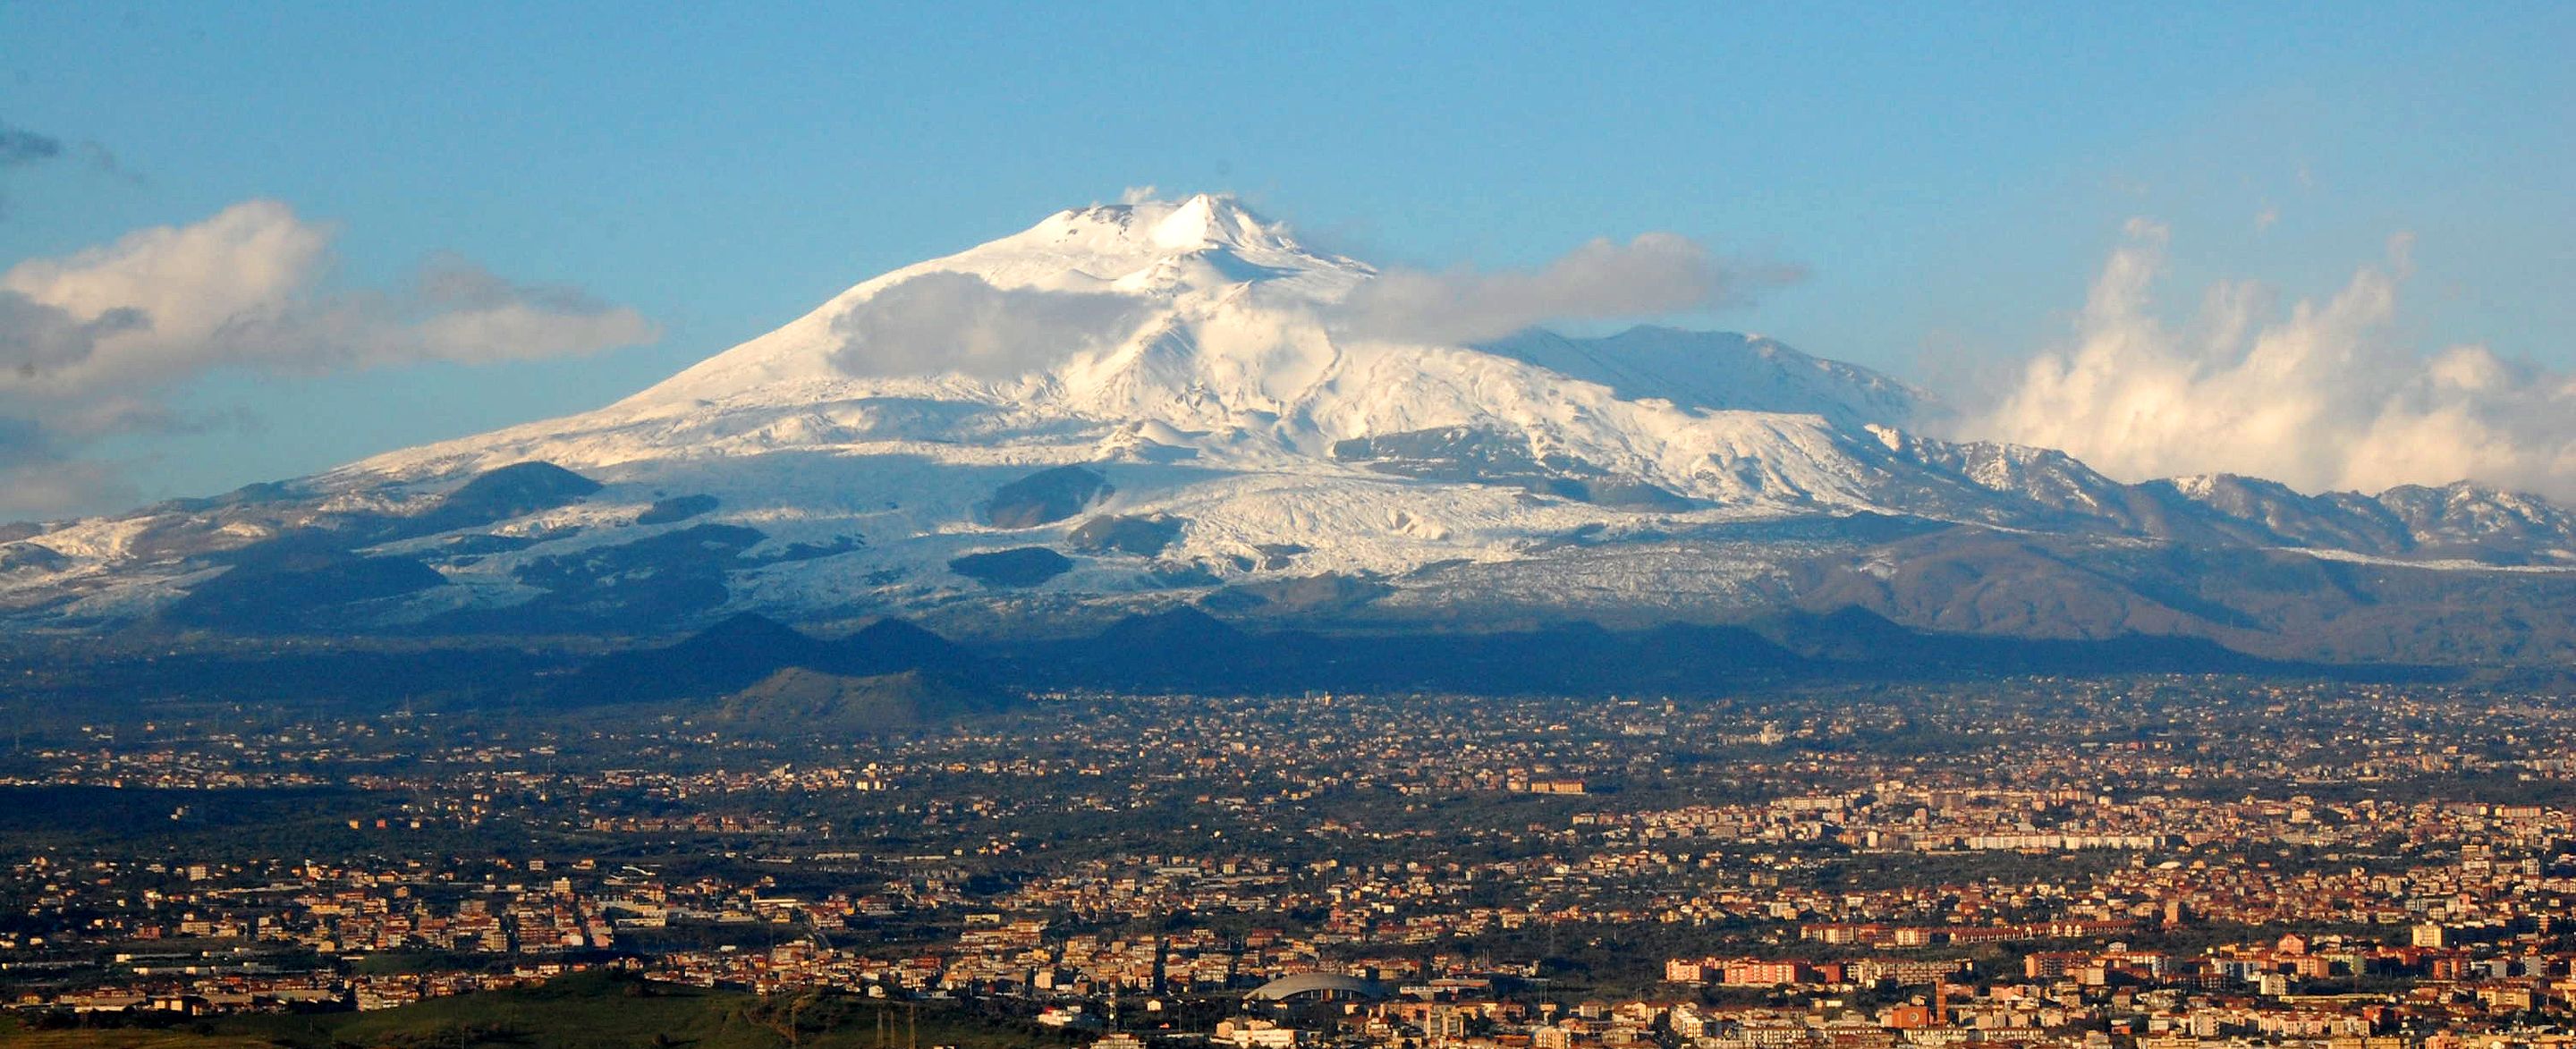 Mt_Etna_and_Catania1.jpg